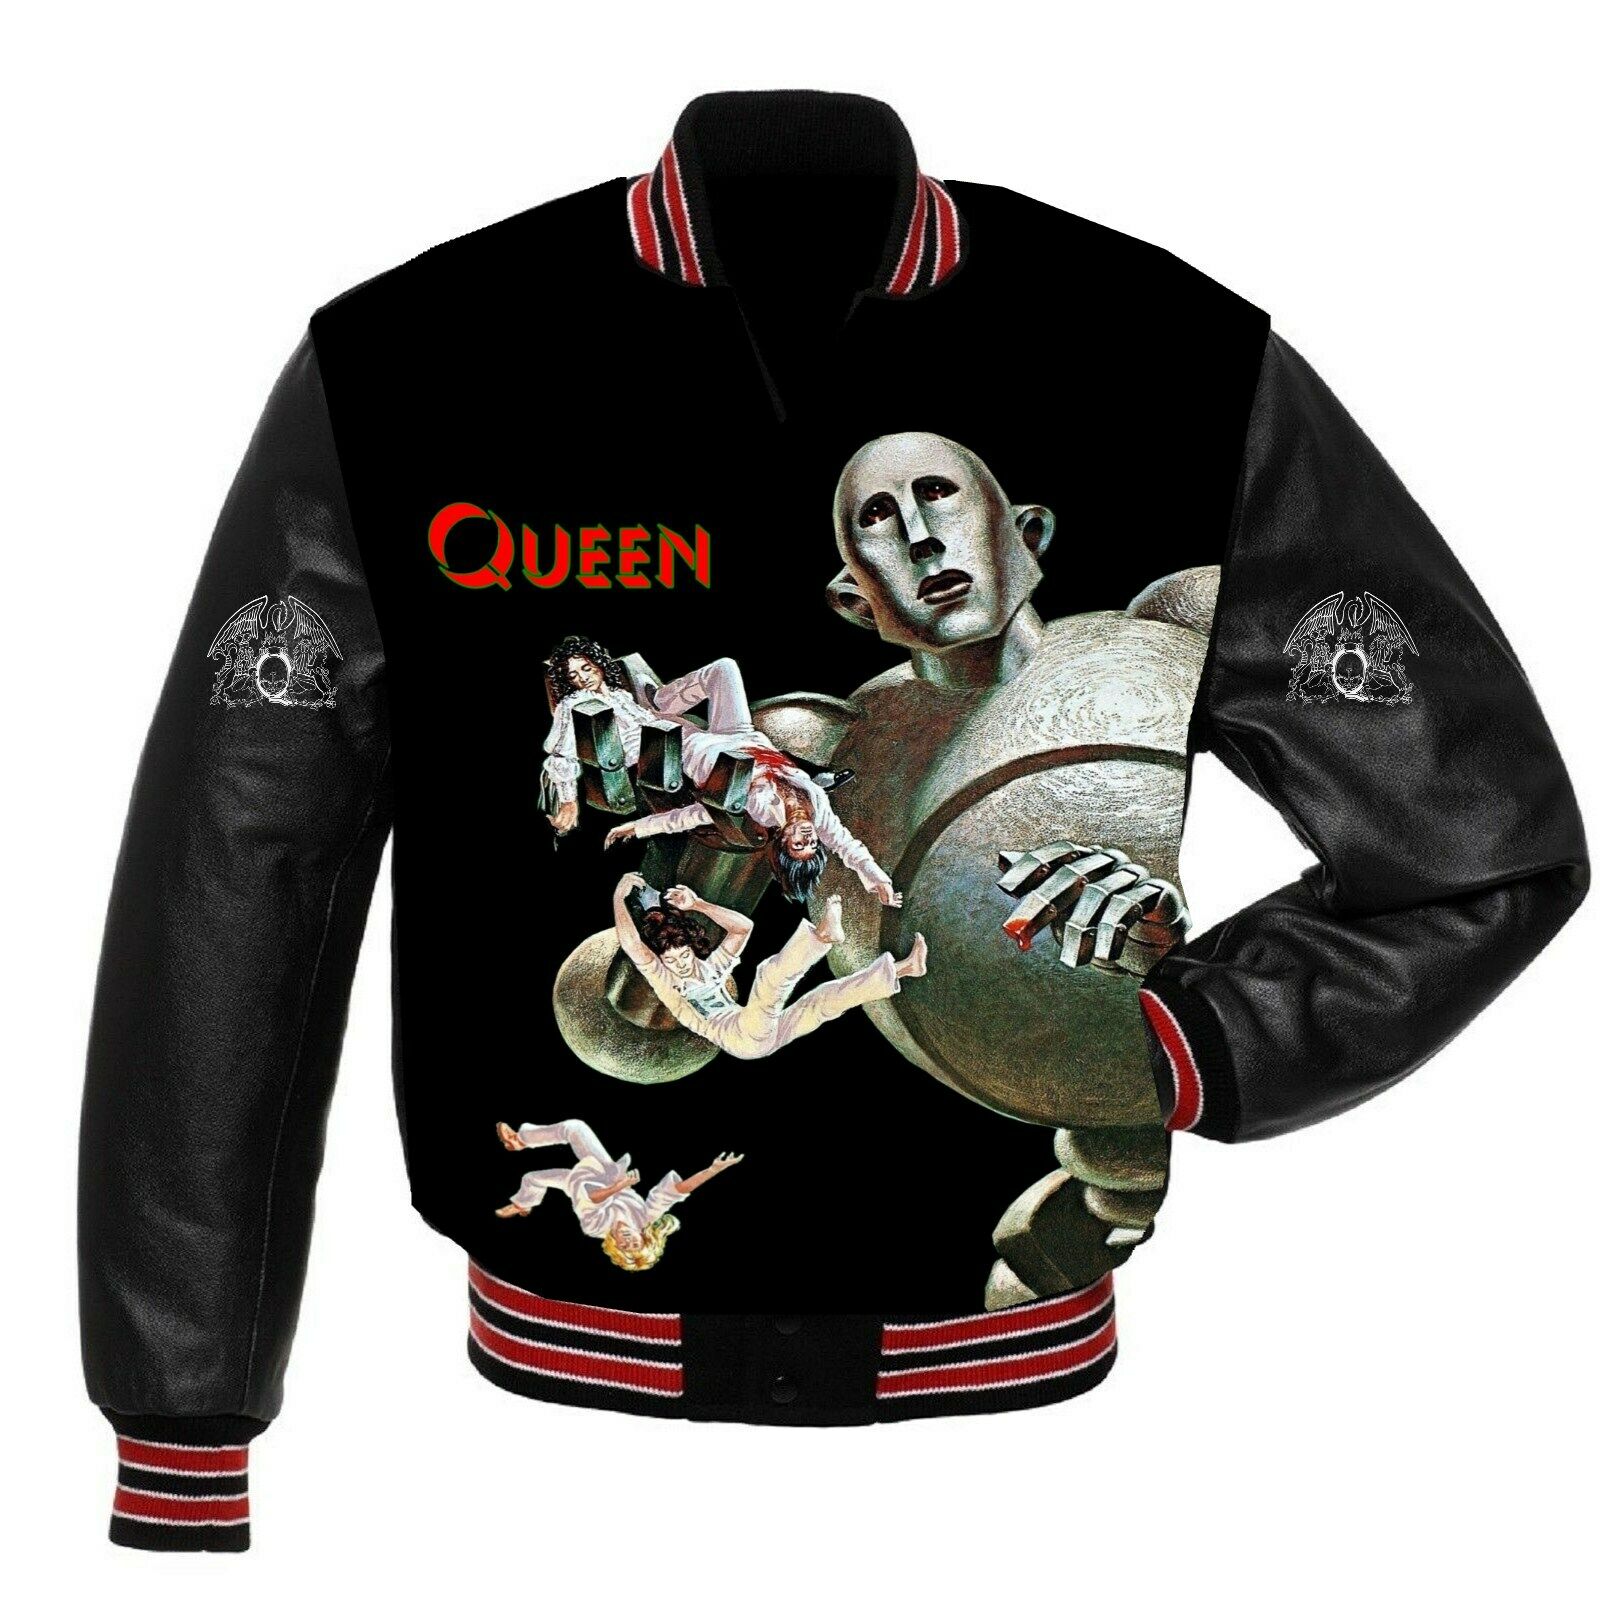 Queen Full Print Satin Jacket Leather Sleeves Shirt All Sizes